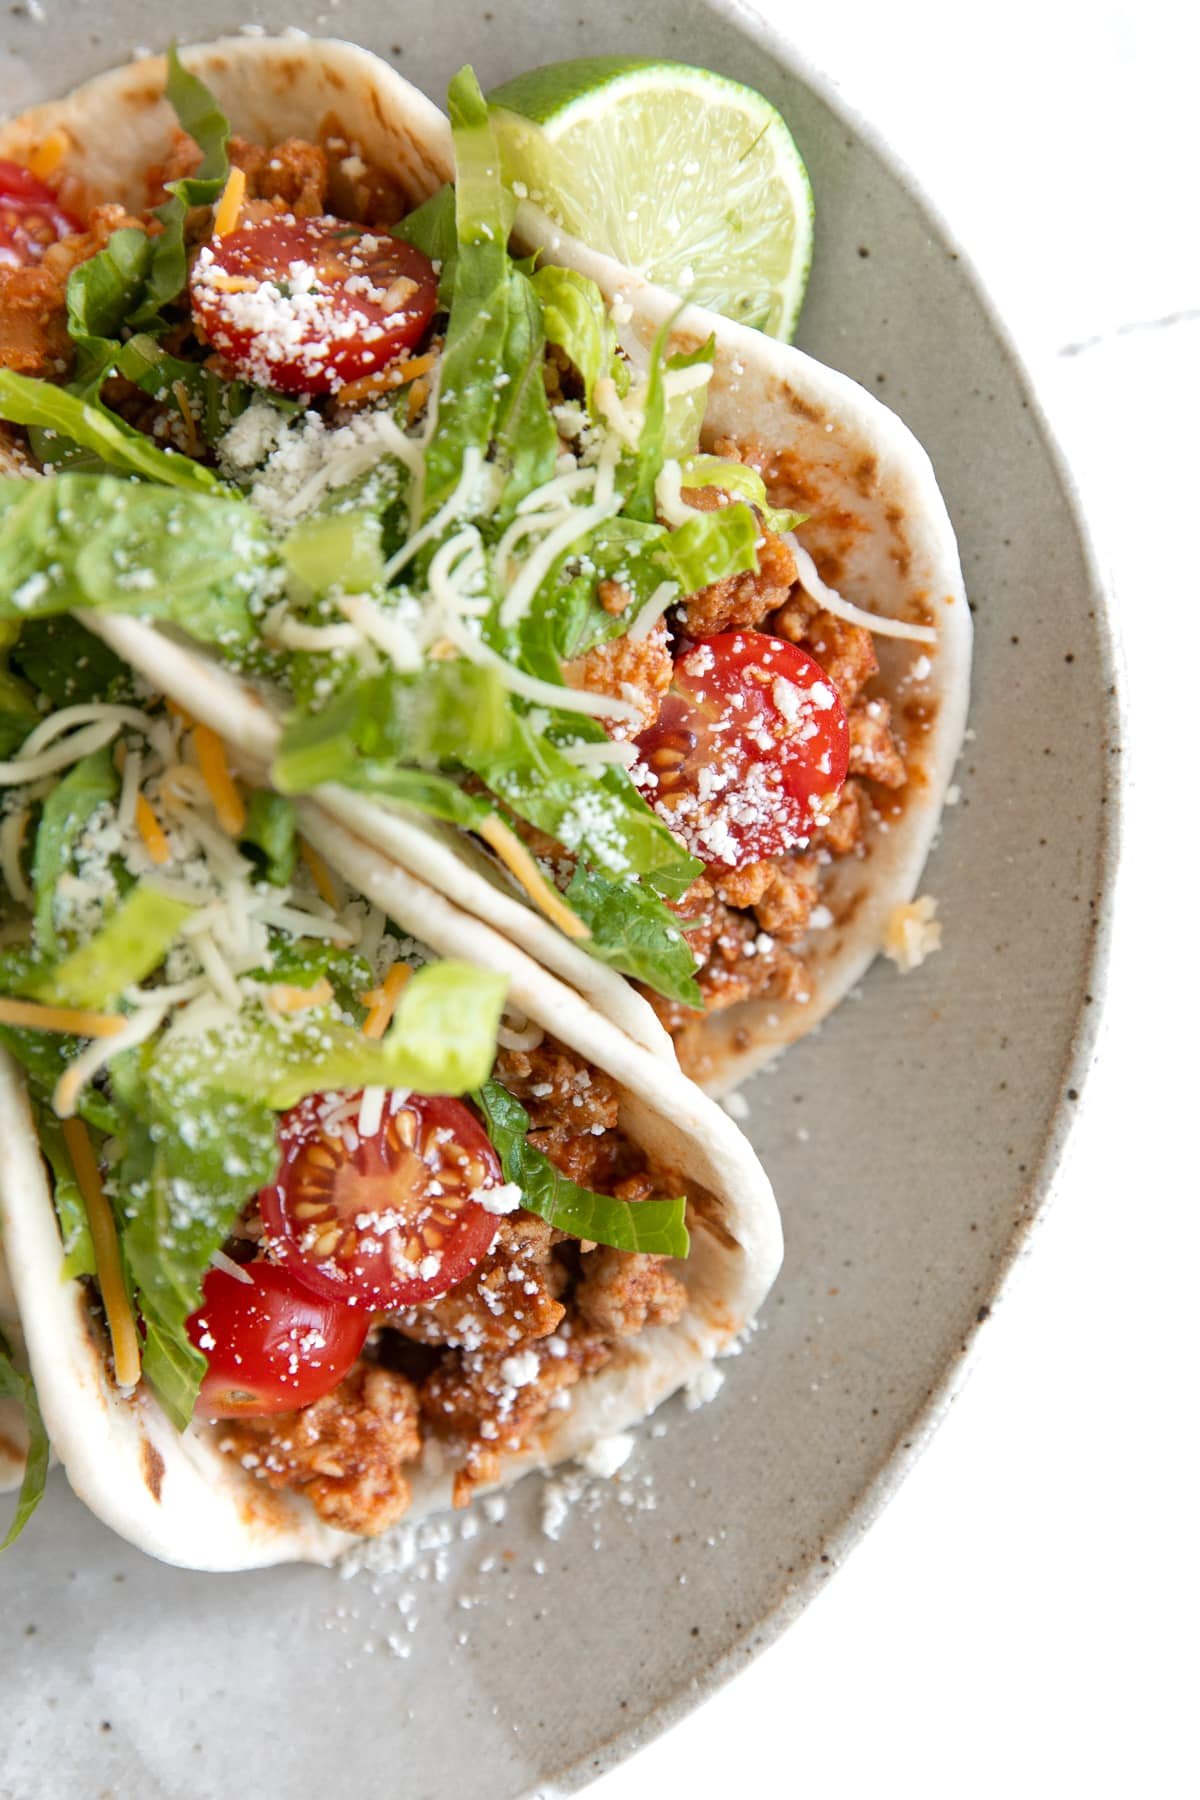 Overhead image of two soft tacos filled with ground turkey taco meat and topped with halved cherry tomatoes, chopped lettuce, and cheese.